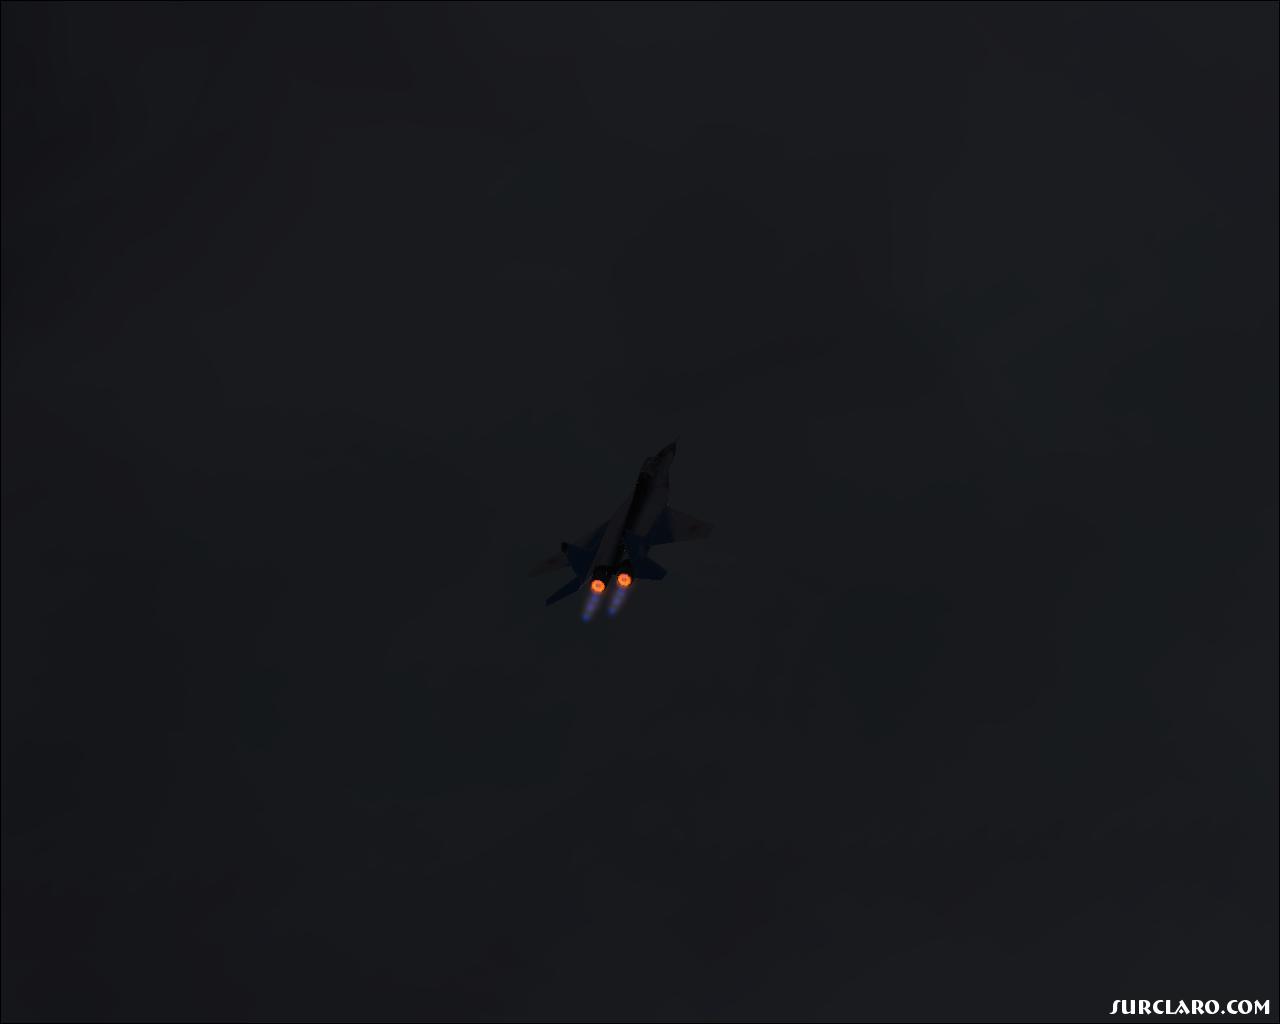 Mig-29 climbing vertical at night with afterburners. - Photo 15769